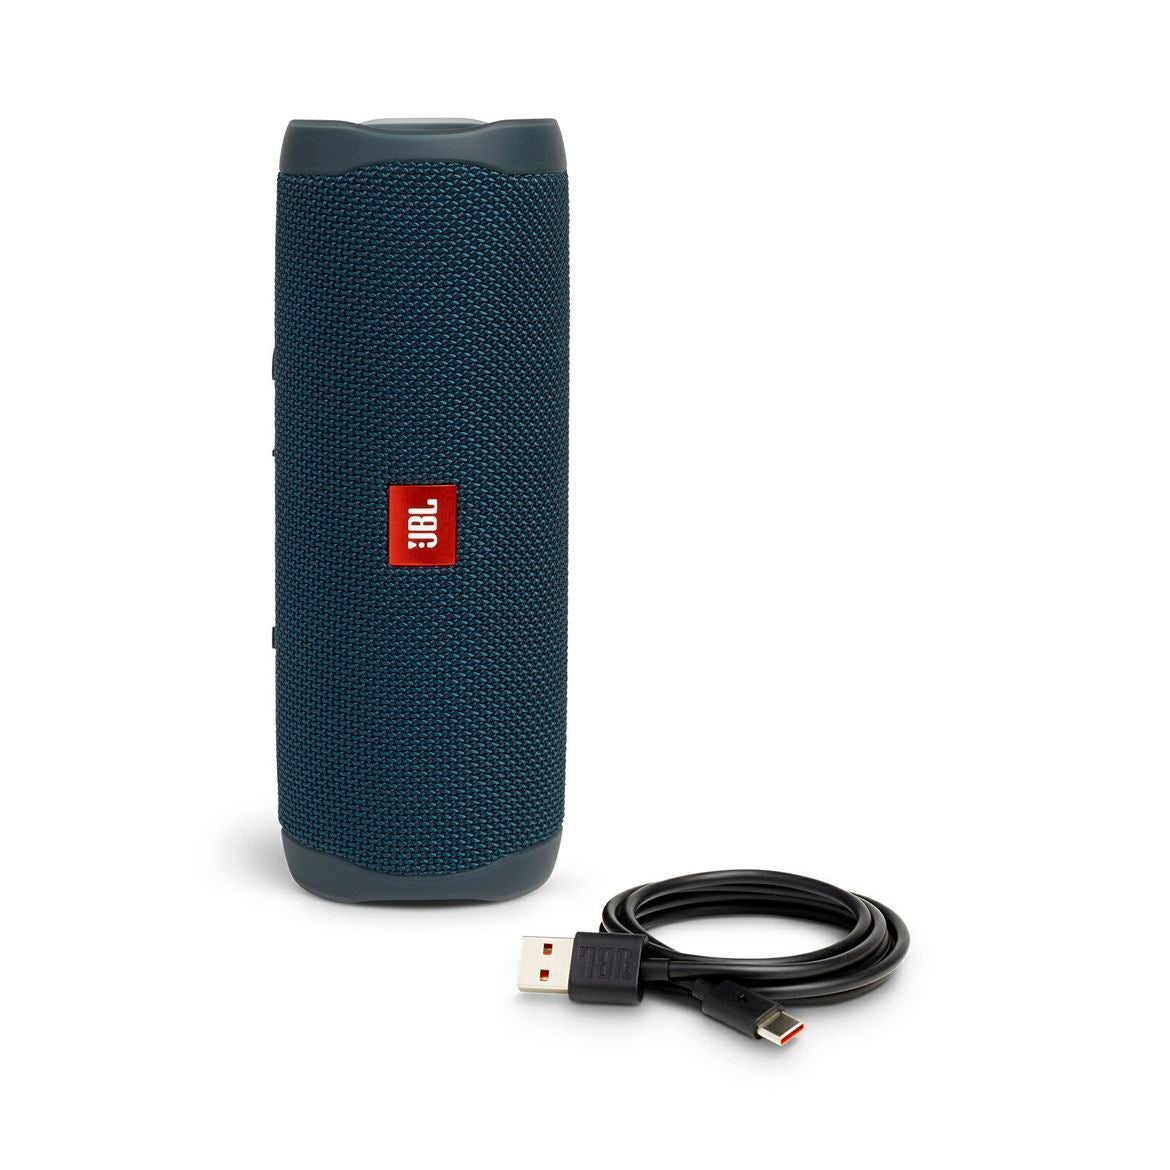 The JBL Flip 5 is a water-resistant Bluetooth speaker with 12 hours of battery life - Water-resistant JBL Flip 5 and kid-friendly JBL JR POP wireless speakers announced at CES 2019